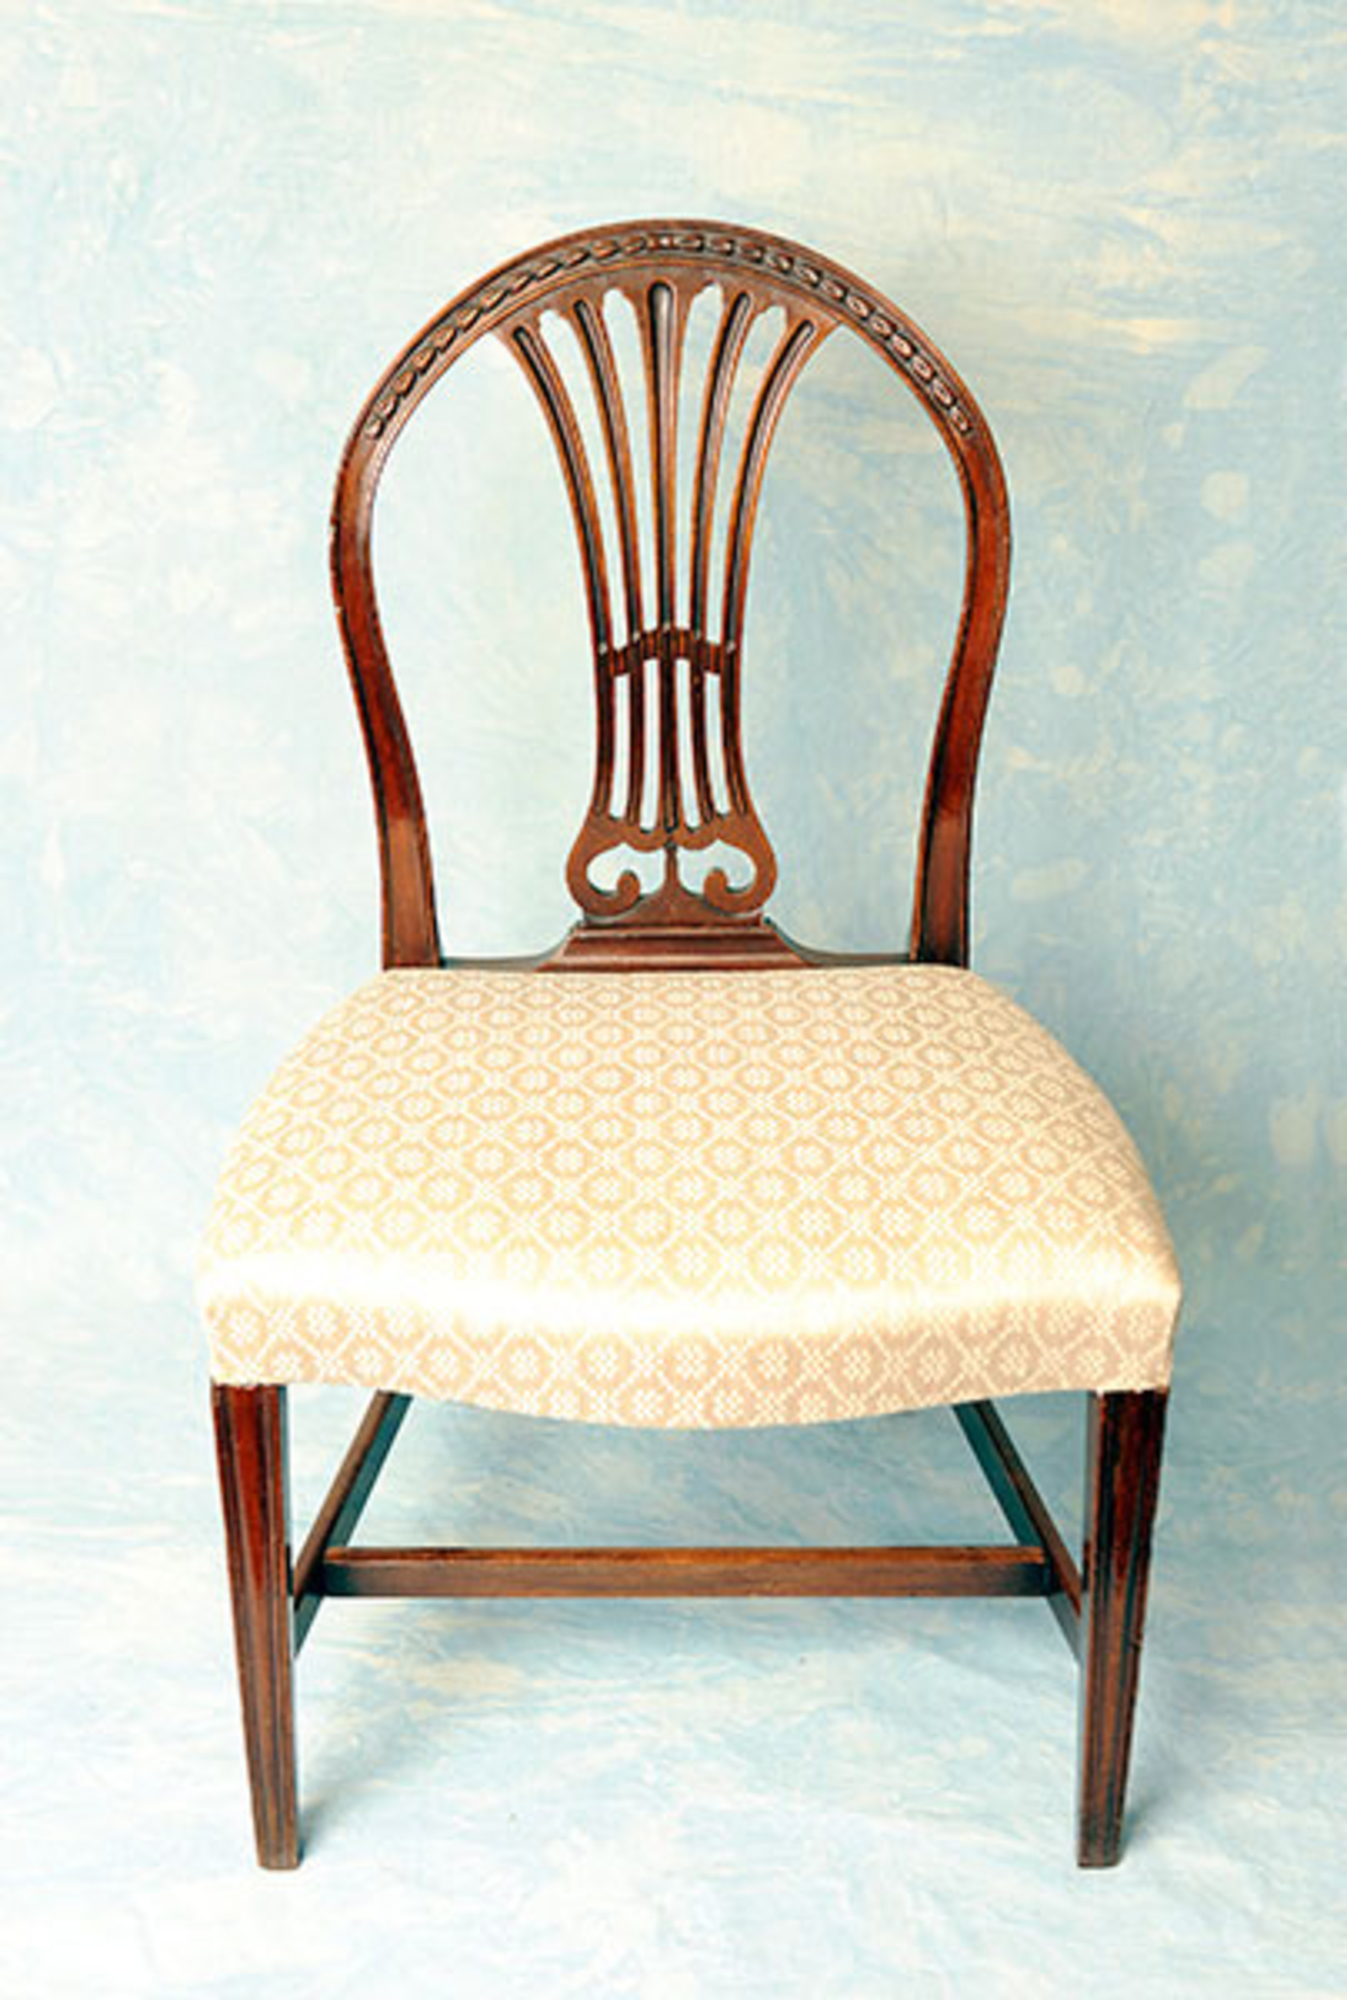 A very attractive set of late 18th century mahogany dining chairs in the Hepplewhite taste